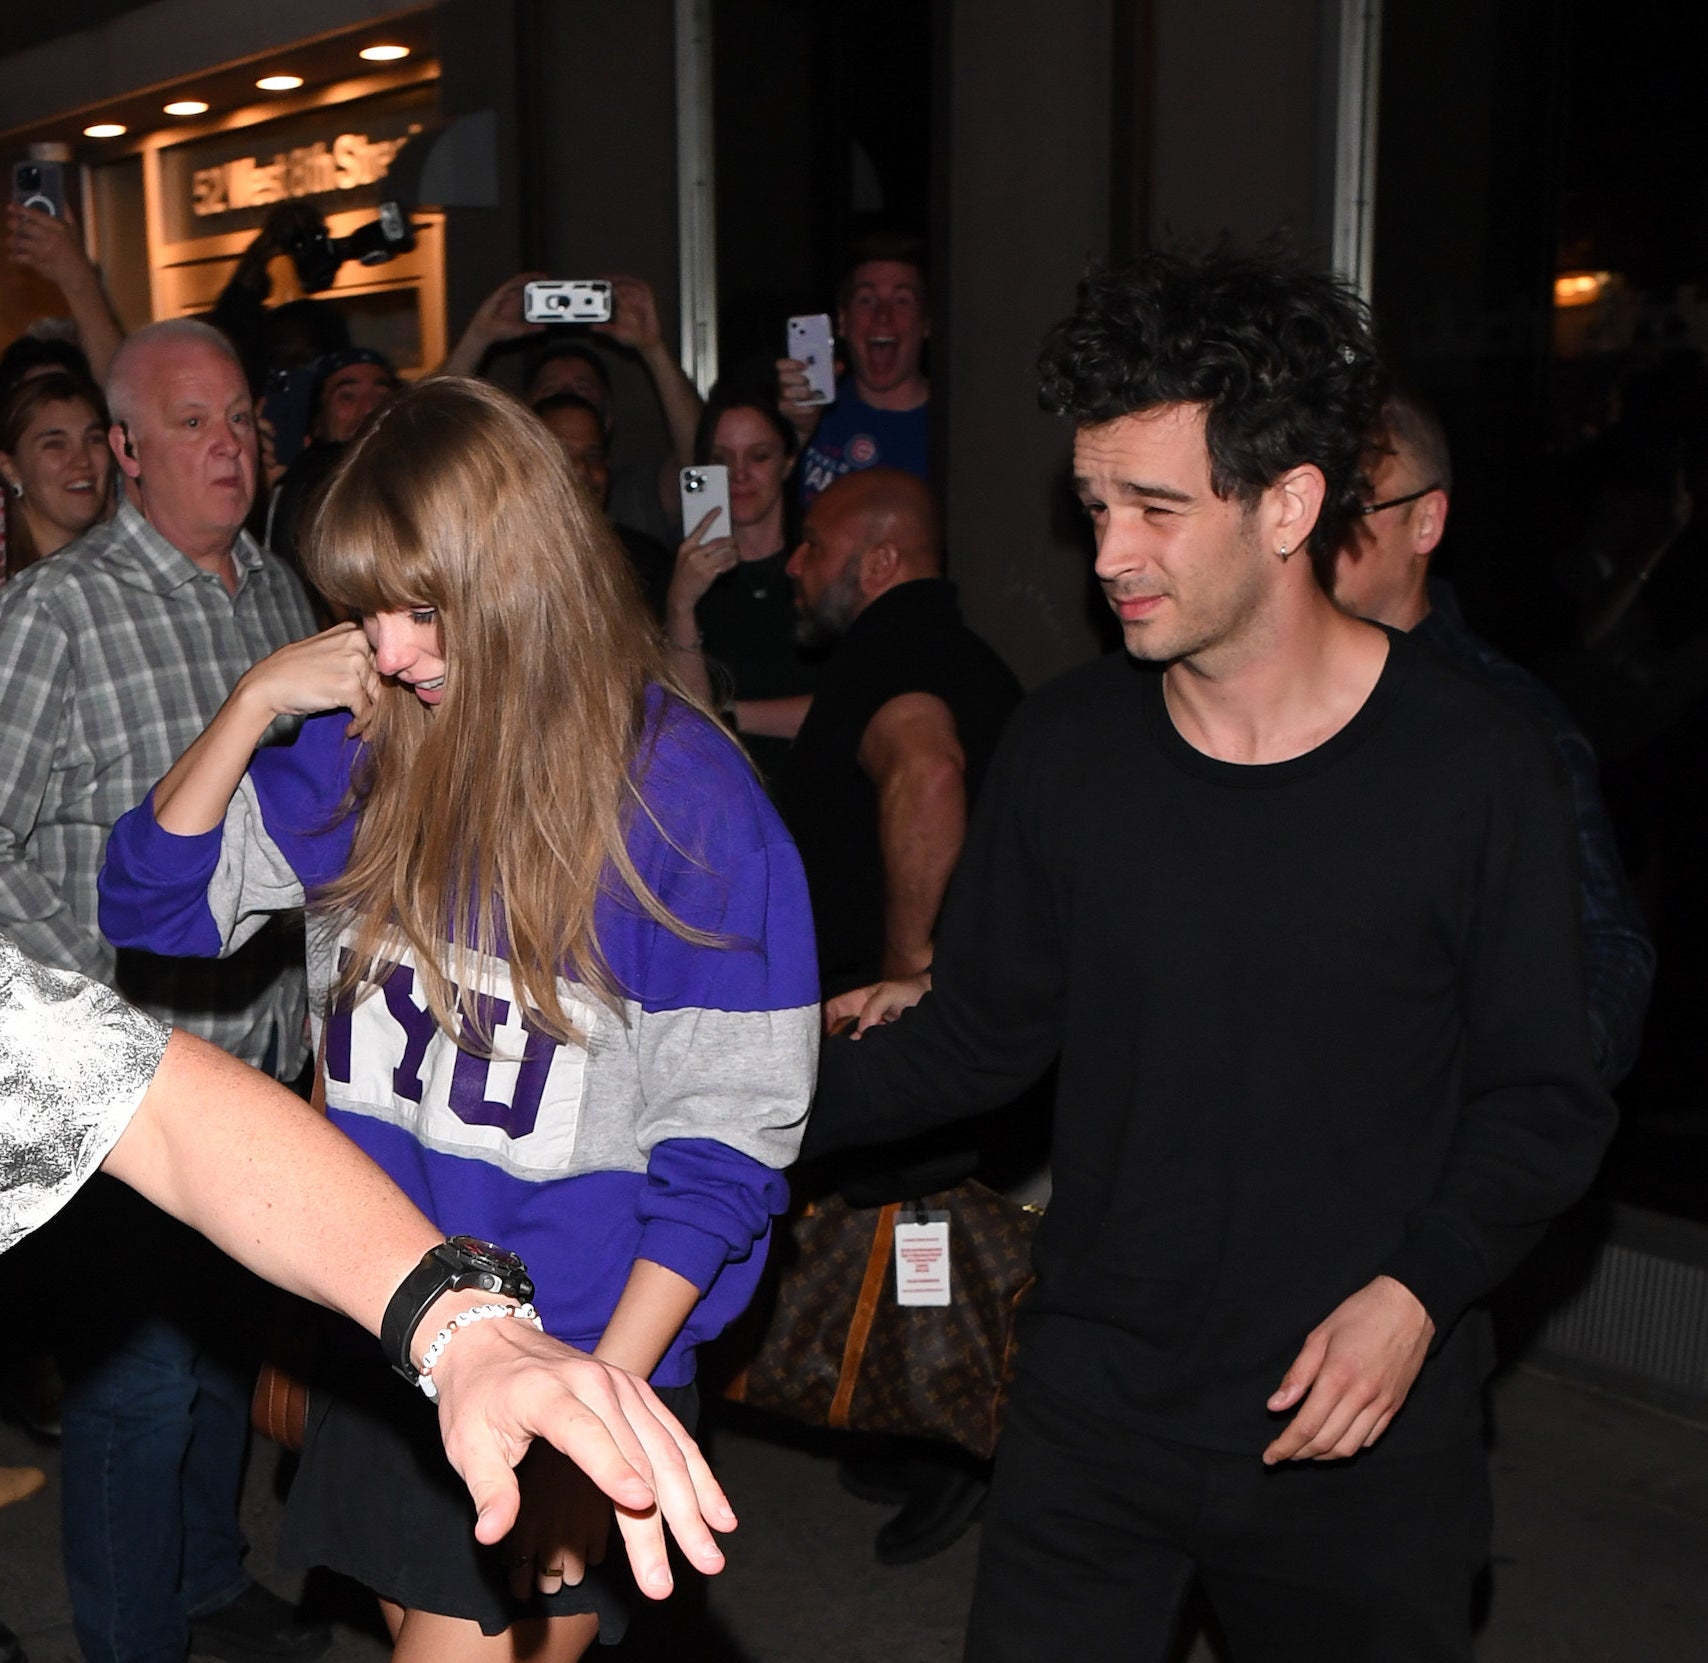 Taylor Swift and Matty Healy walking out of a building as people take photos of them